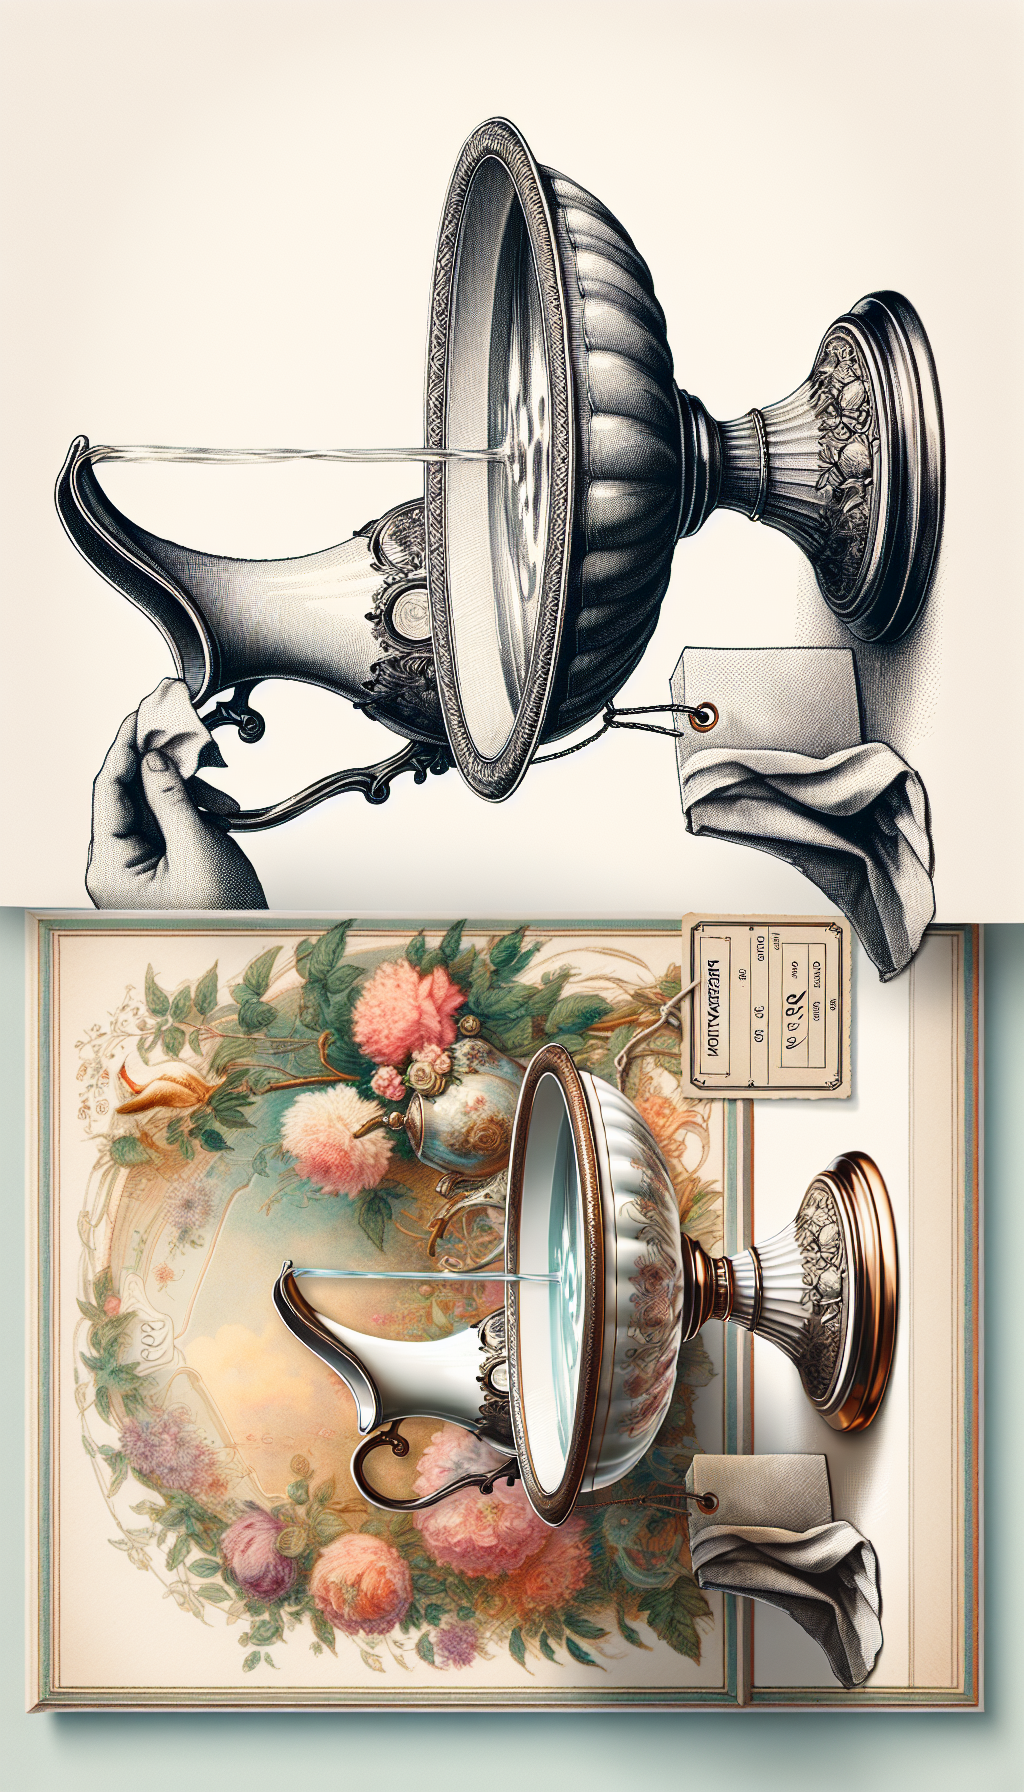 An image depicting an elegantly drawn antique basin and pitcher with stand, glowing gently to denote value. Half is drawn in fine Edwardian line art, showing 'preservation' techniques like a soft cloth dusting it, while the other half is vibrant with watercolor, illustrating 'display' ideas amidst vintage floral motifs. A label hanging from the stand reveals a high price tag, signifying its worth.